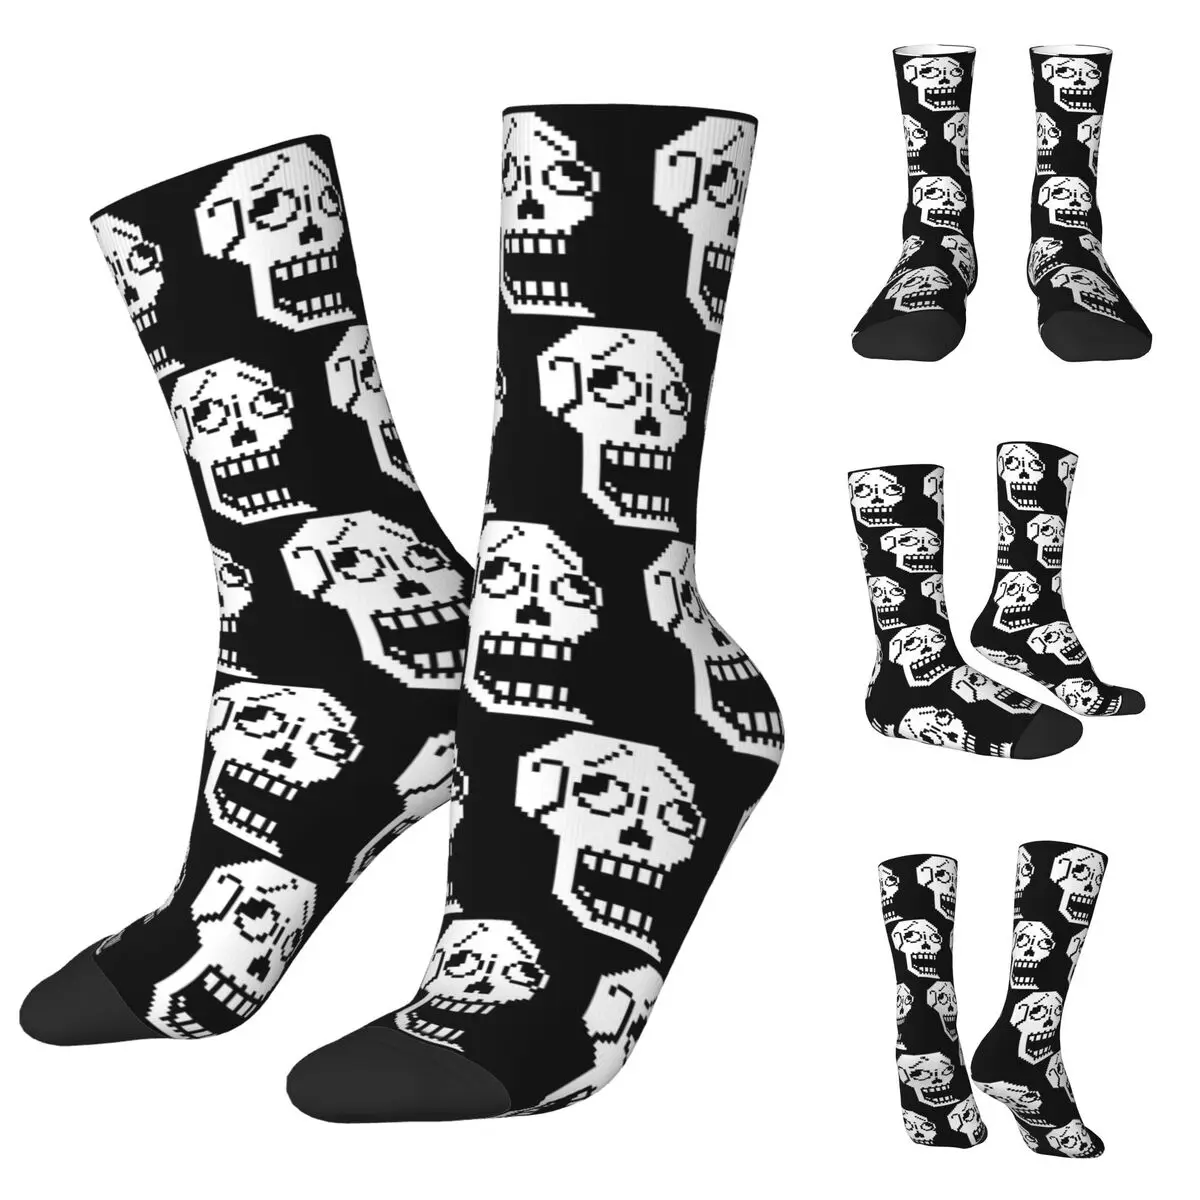 Sans And Papyrus Sprites Undertale Napstablook Men and Women printing Socks,Windproof Applicable throughout the year monster face men women socks leisure beautiful printing suitable for all seasons dressing gifts